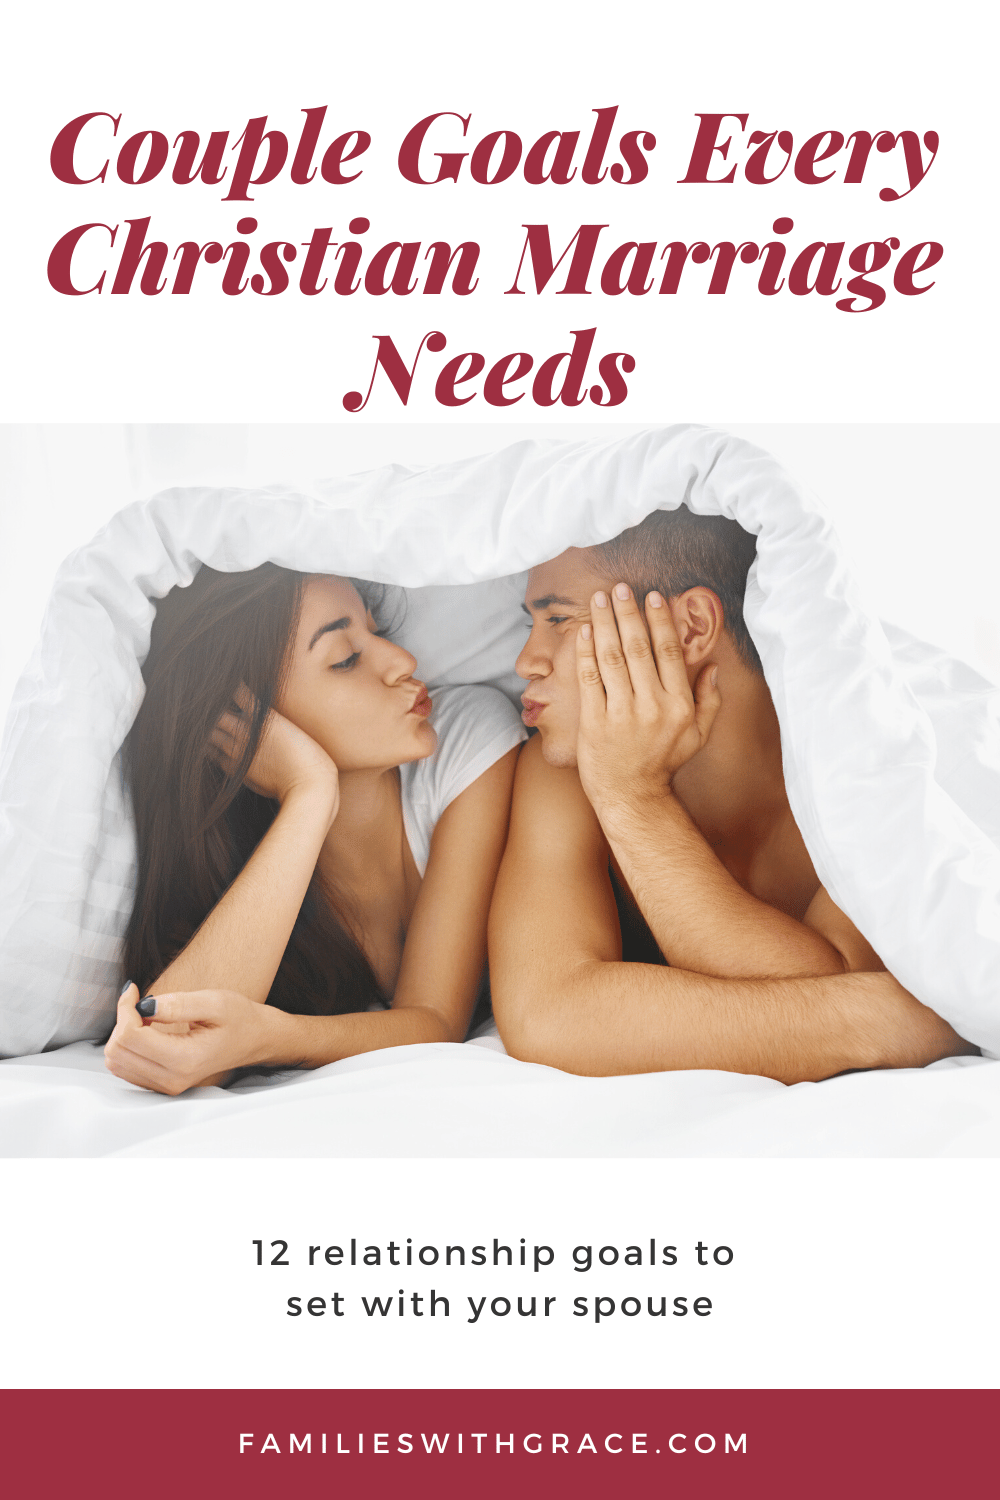 Couple goals every Christian marriage needs